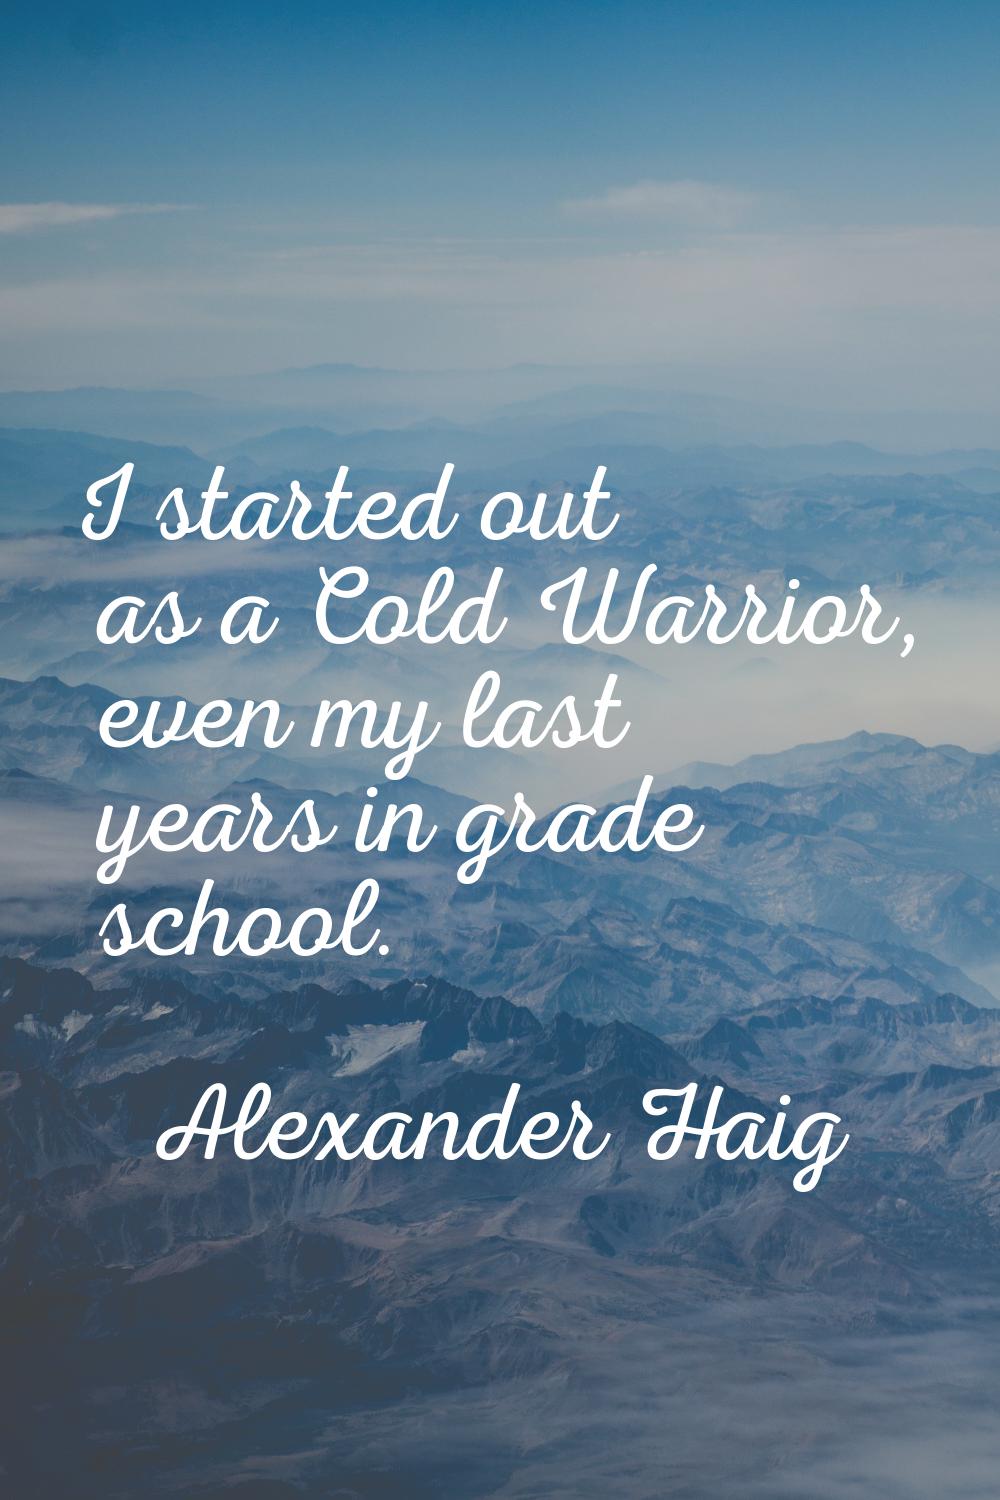 I started out as a Cold Warrior, even my last years in grade school.